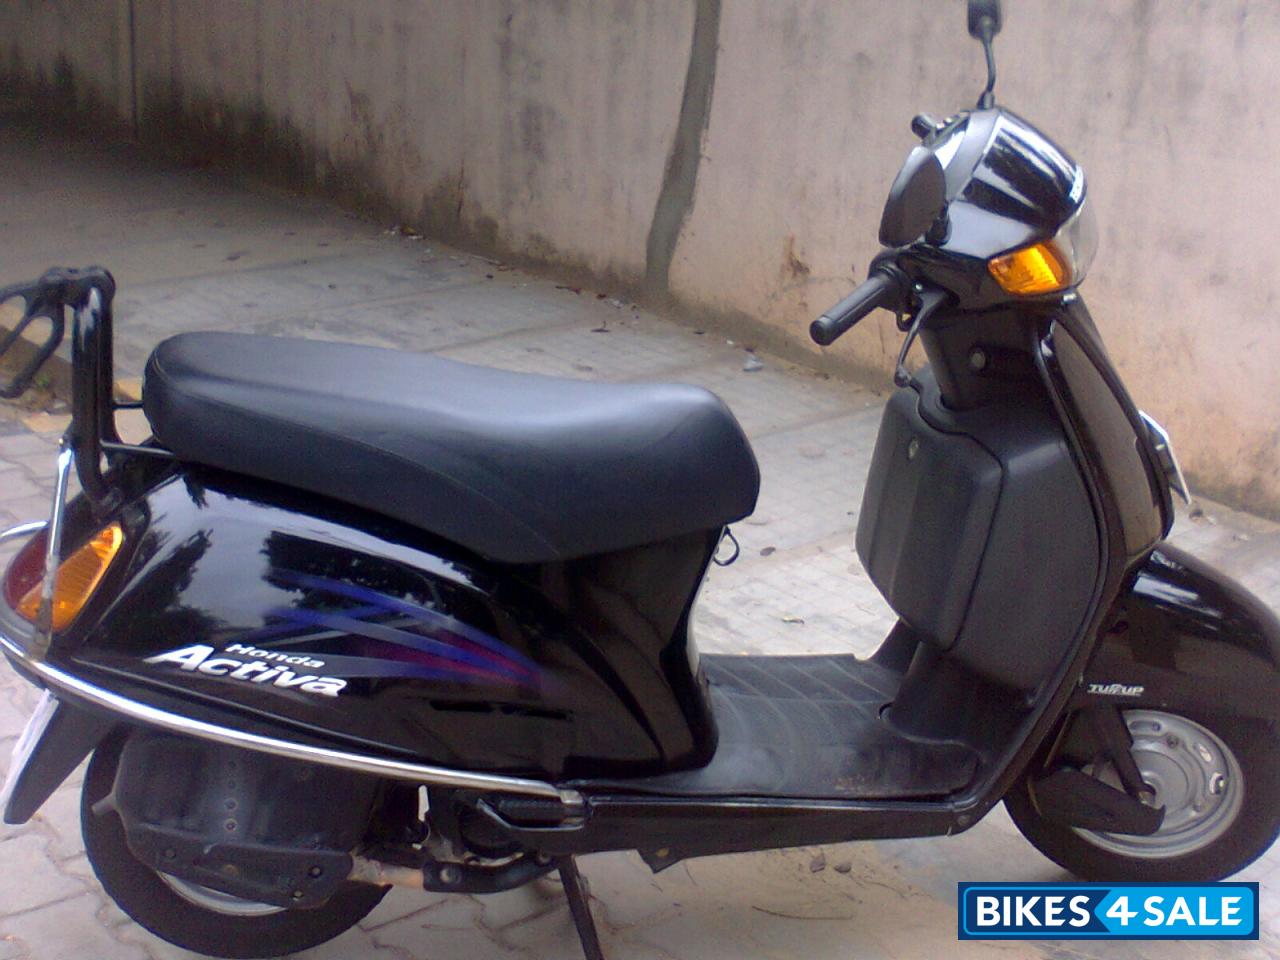 Second hand honda scooters in bangalore